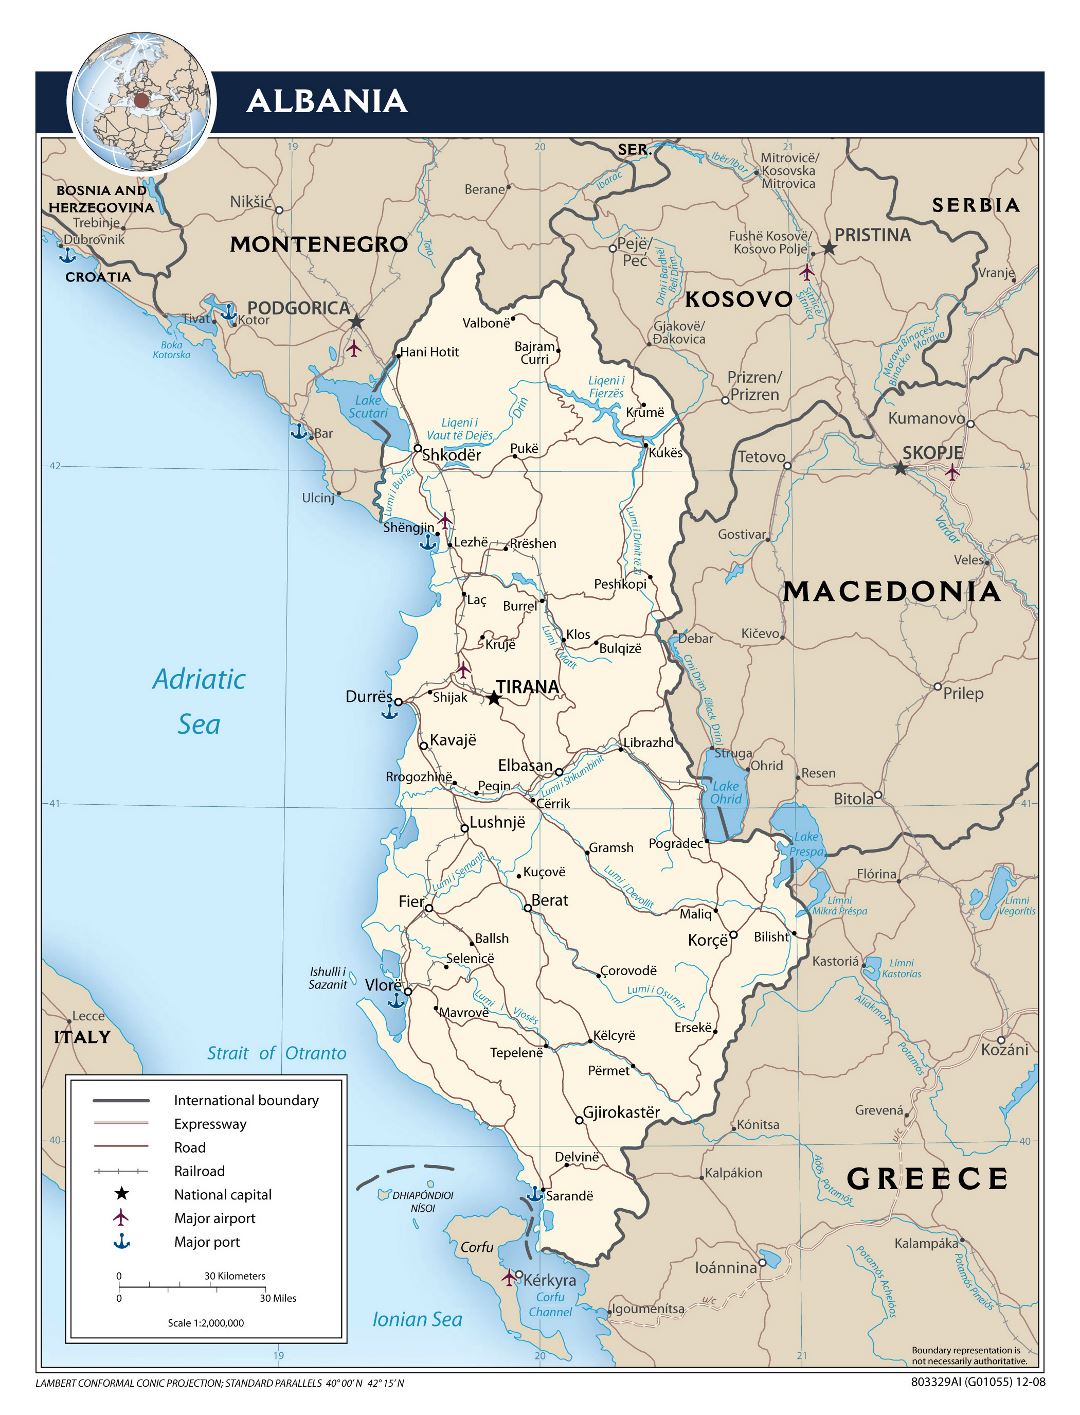 Large scale political map of Albania with roads, cities and airports - 2008